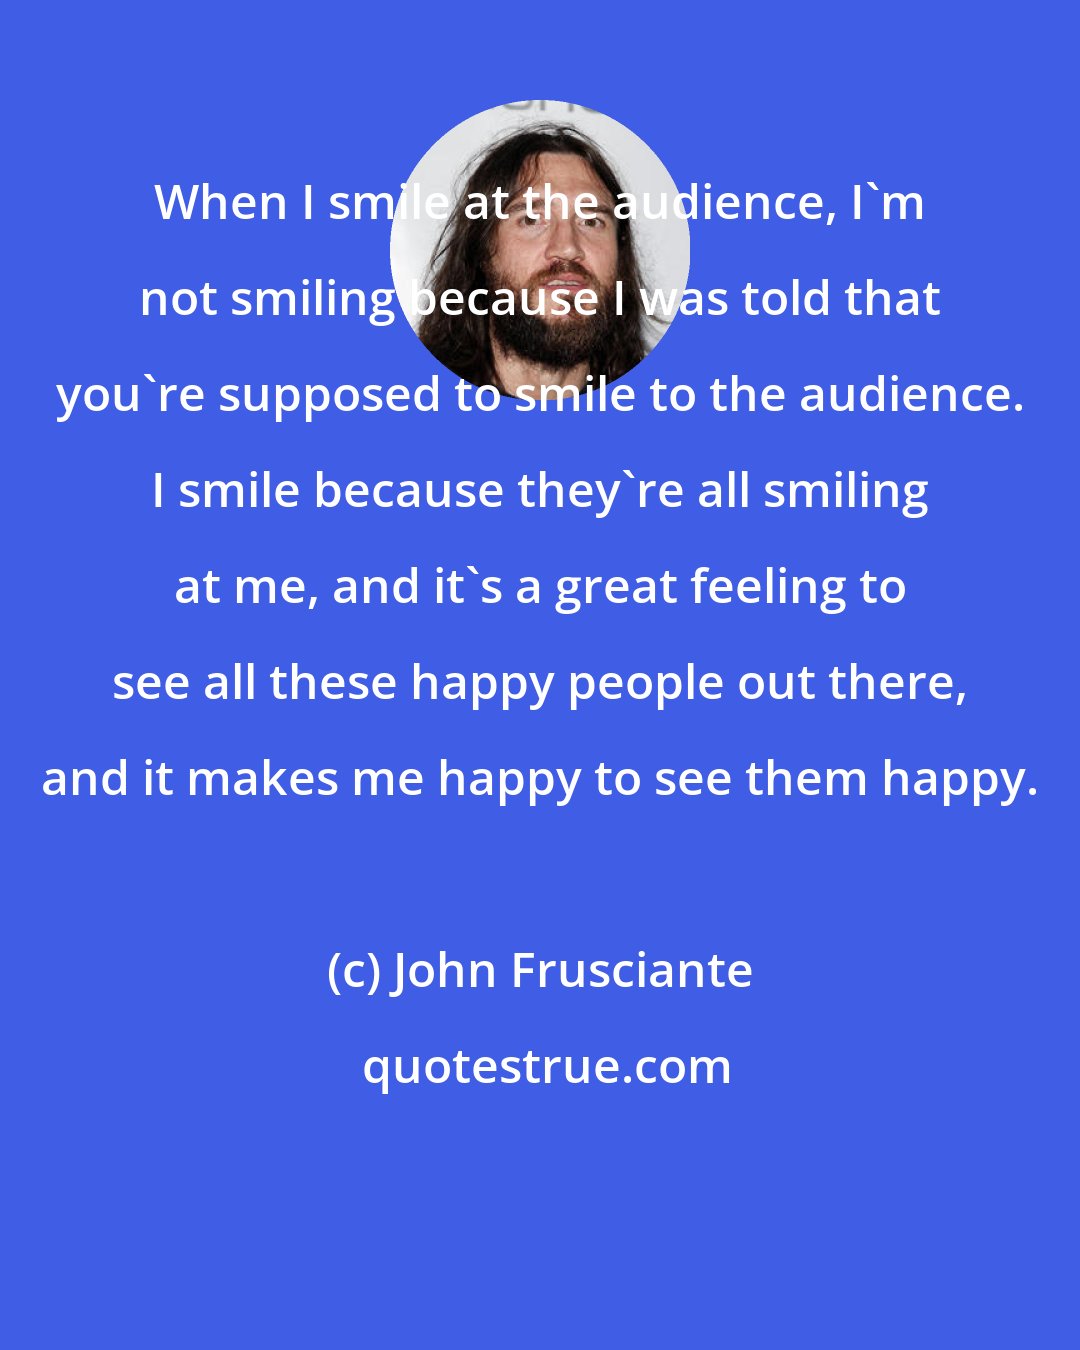 John Frusciante: When I smile at the audience, I'm not smiling because I was told that you're supposed to smile to the audience. I smile because they're all smiling at me, and it's a great feeling to see all these happy people out there, and it makes me happy to see them happy.